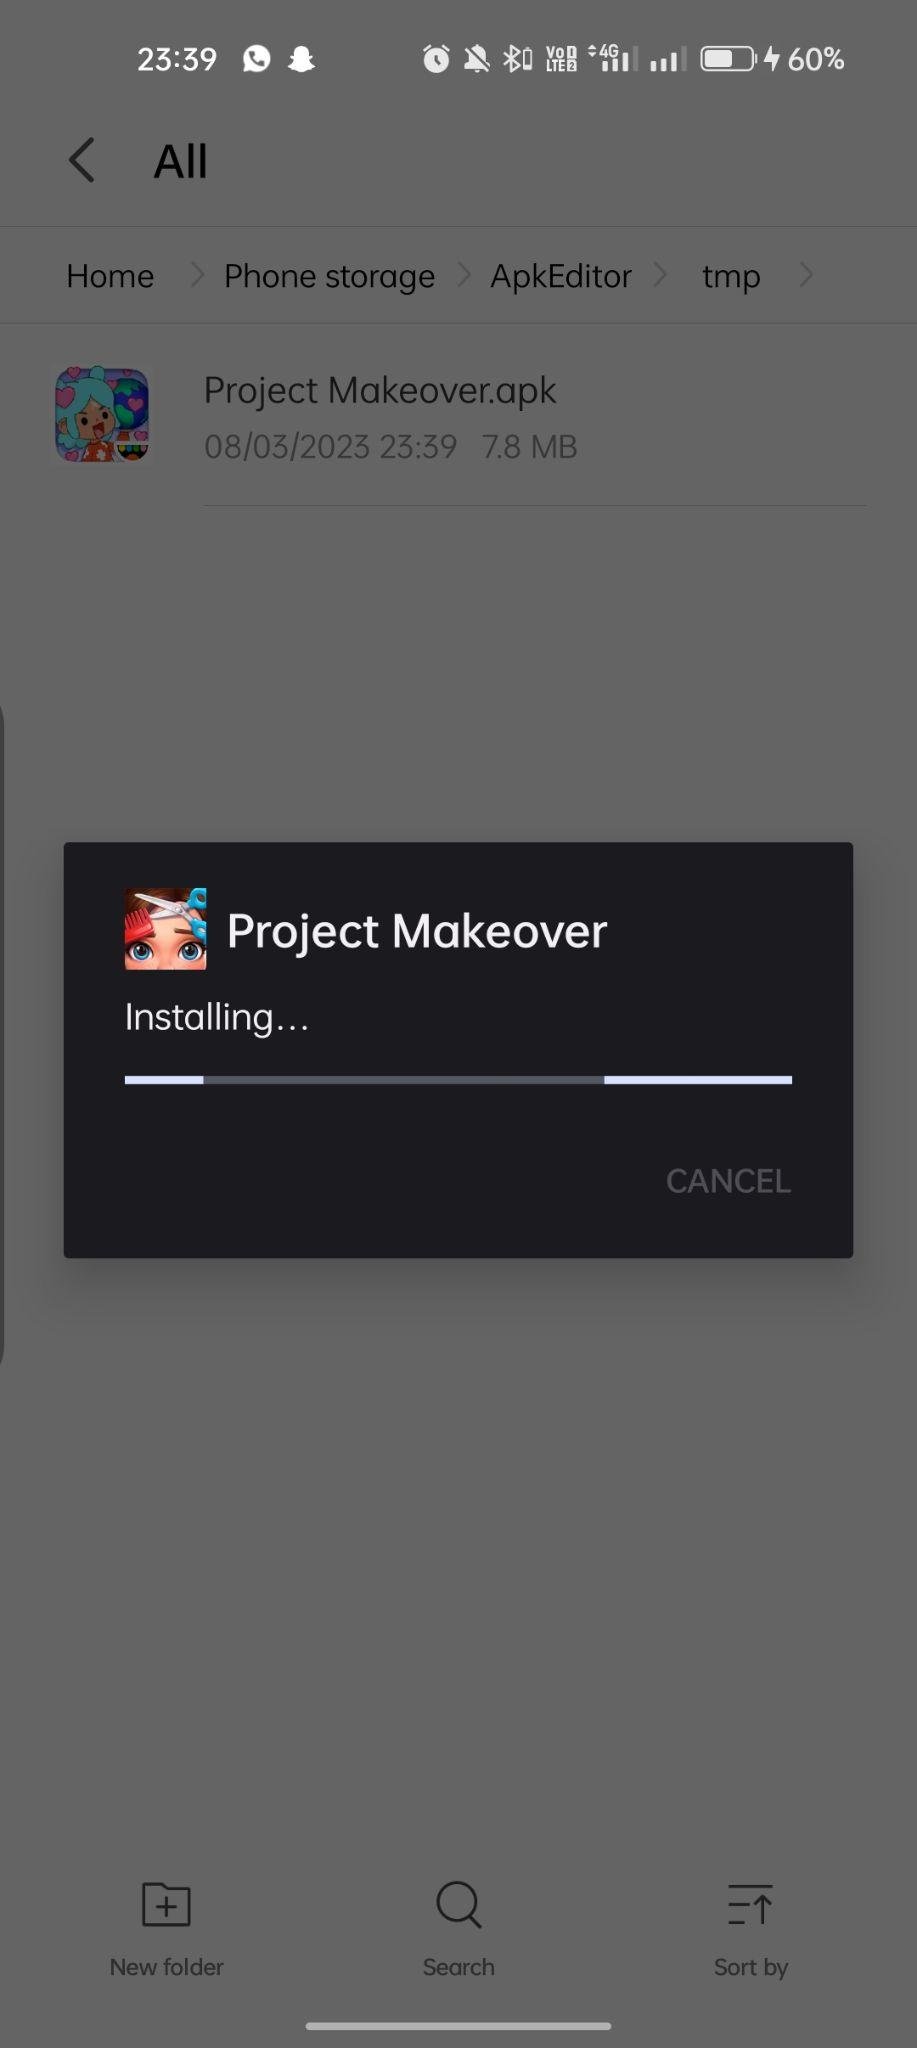 Project Makeover apk installing